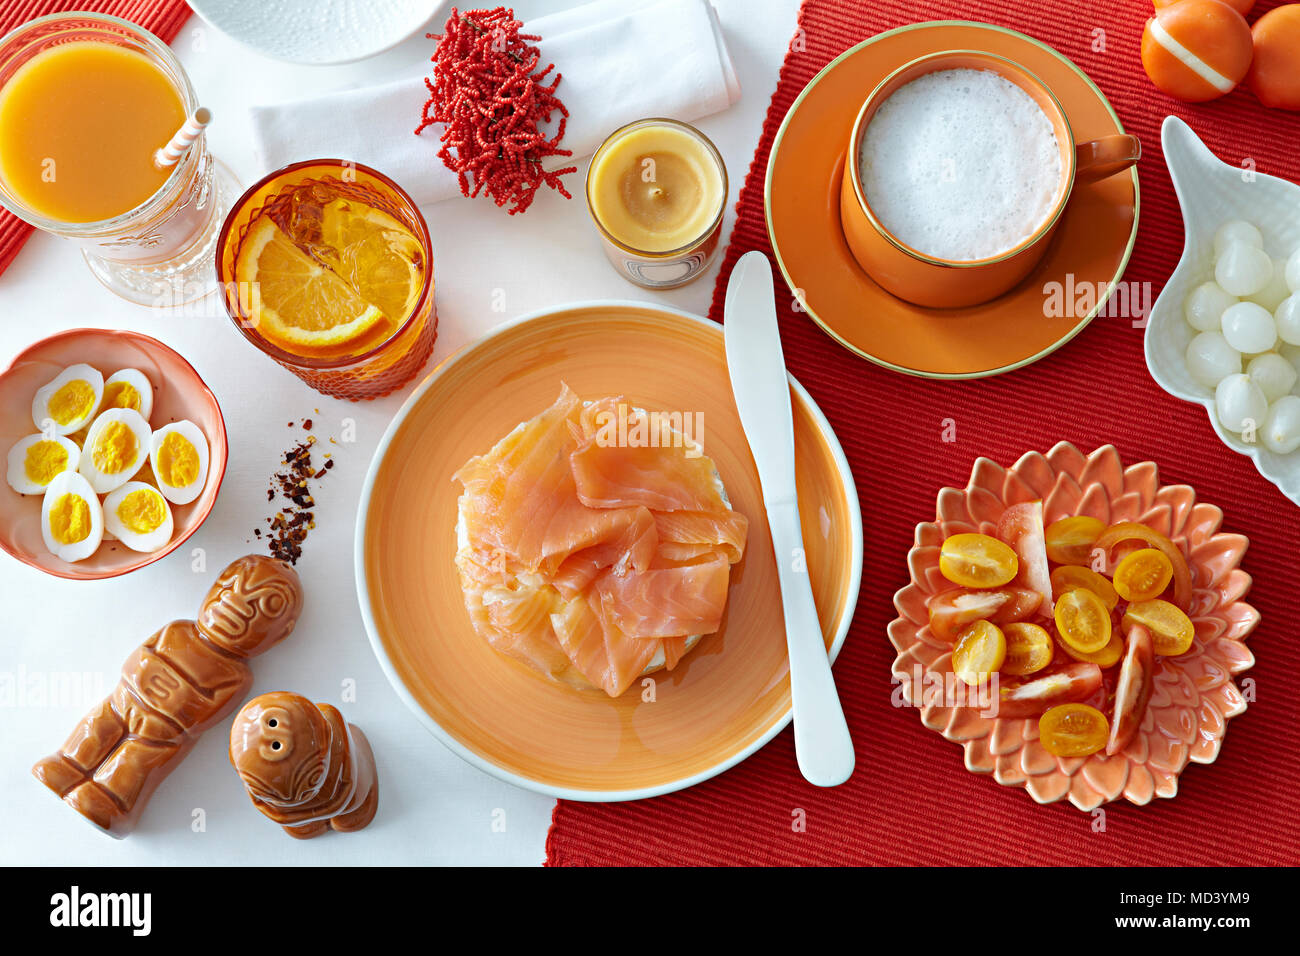 Table with fresh salmon, boiled eggs and tomatoes Stock Photo